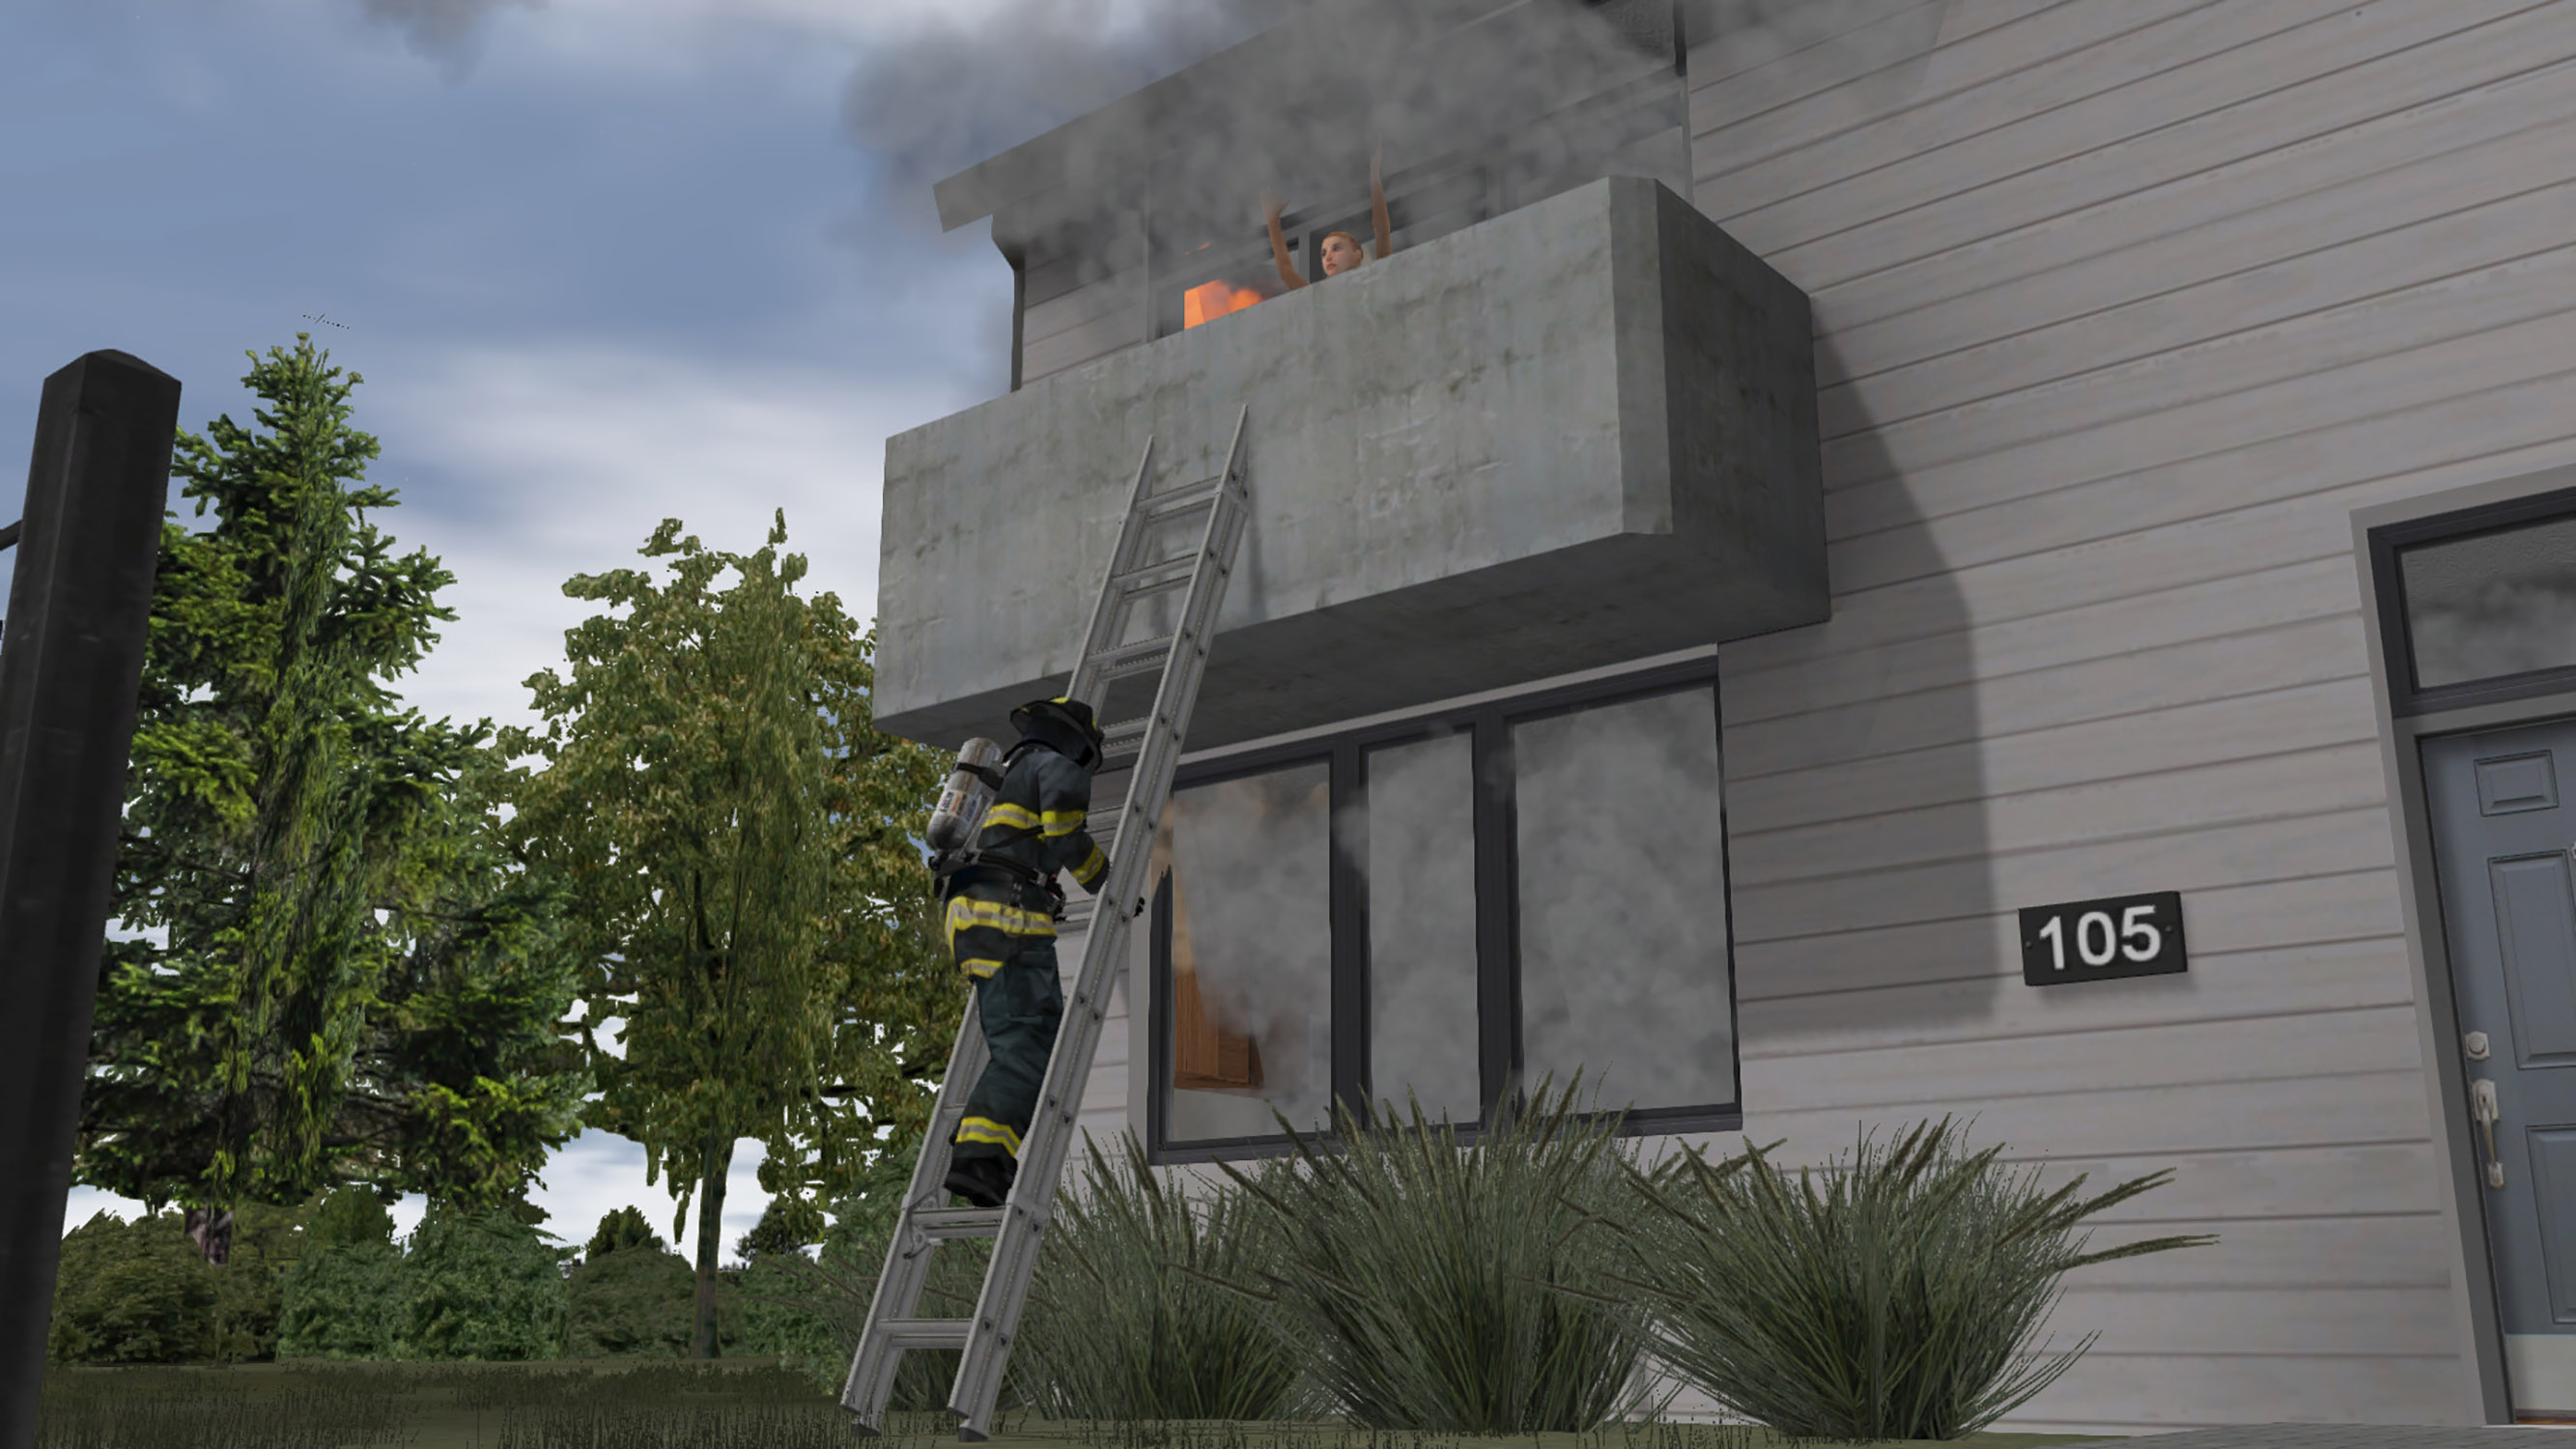 Firefighter climbing up a balcony using a ladder to save a casualty stuck in a burning home